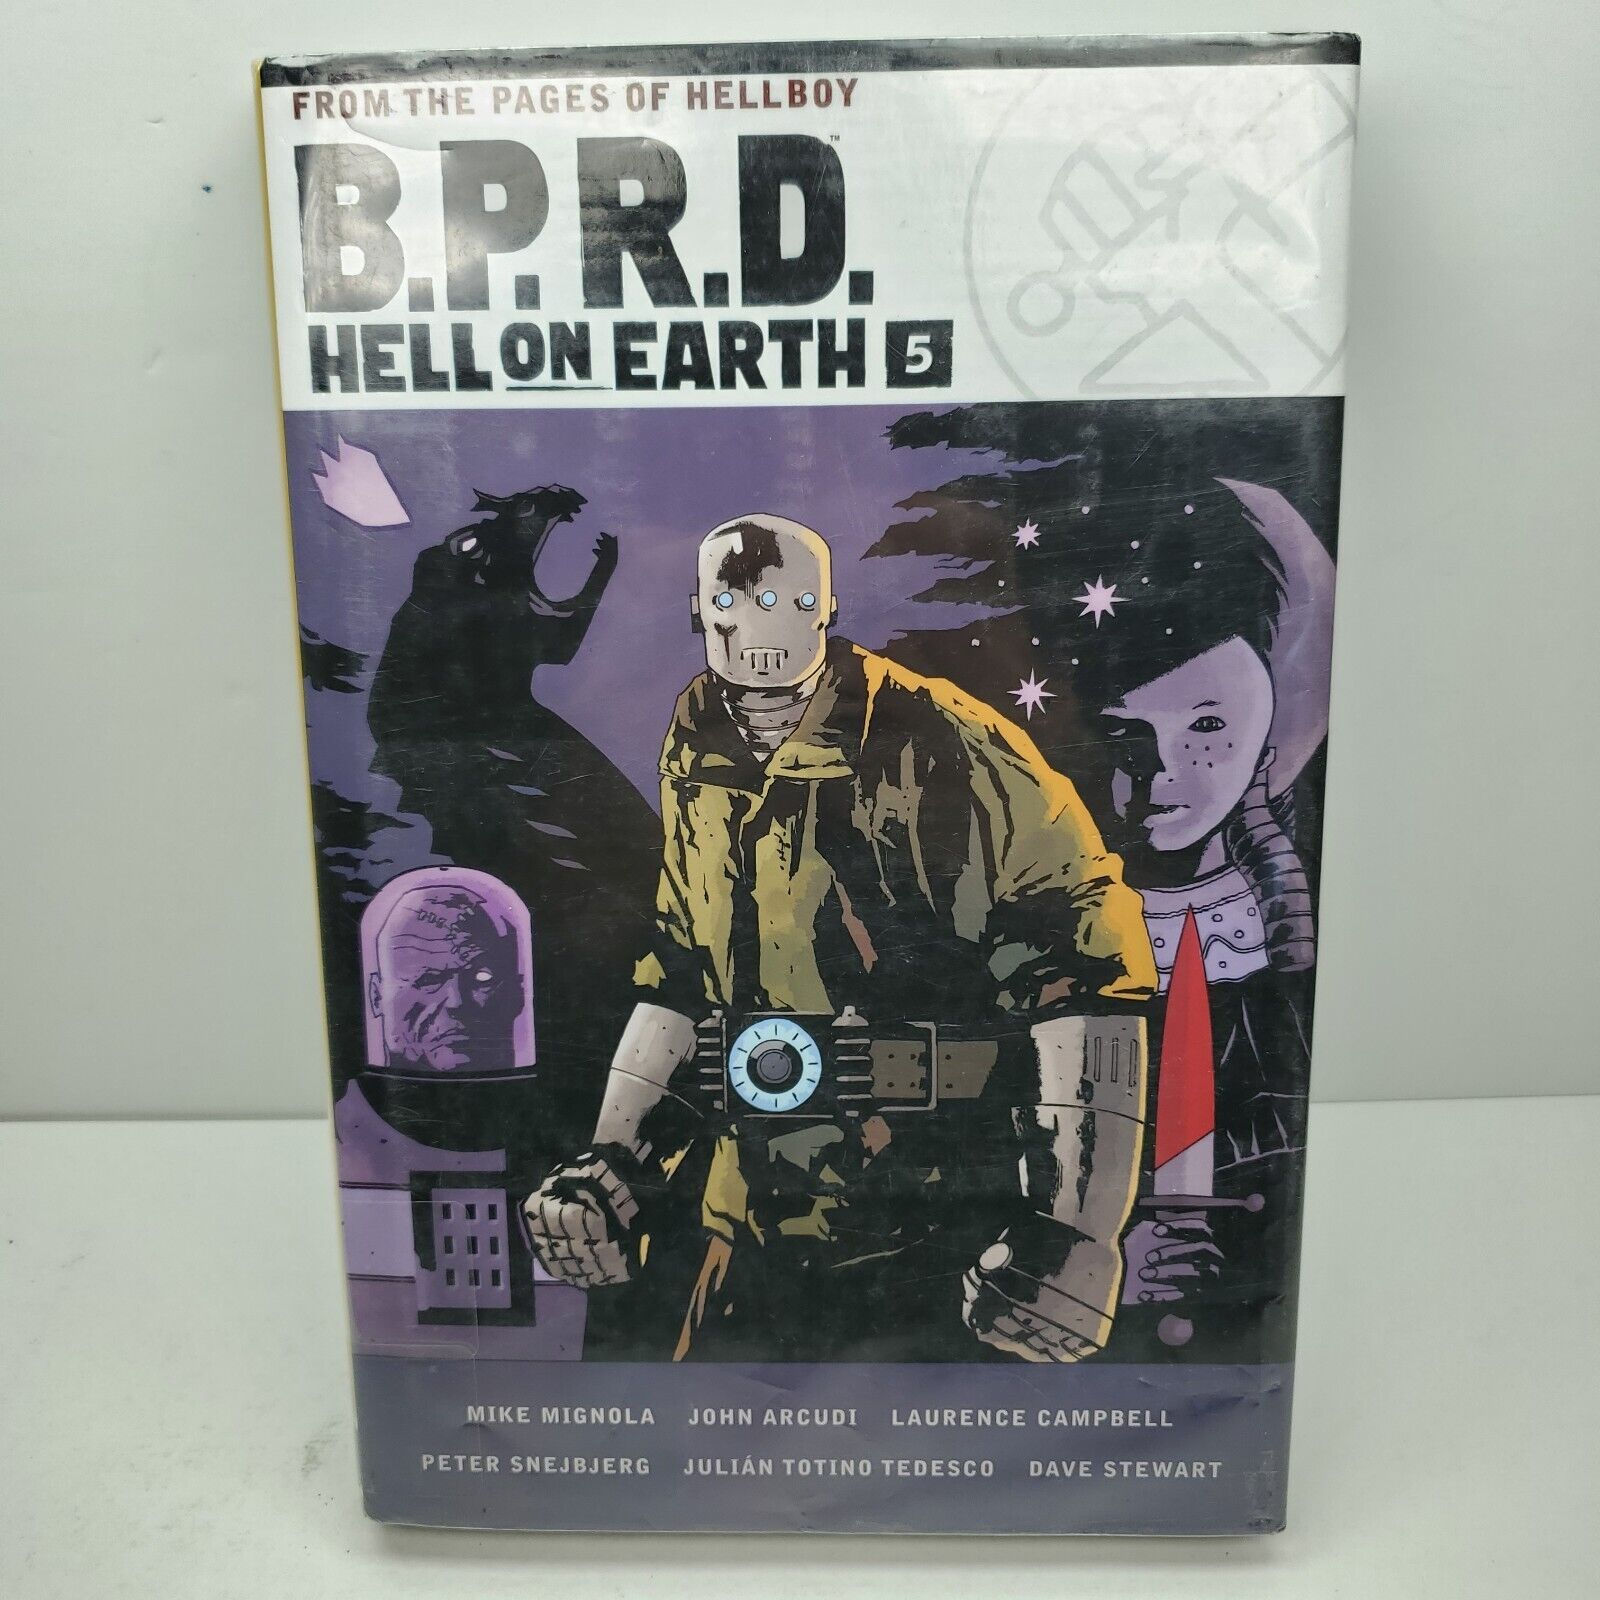 B.P.R.D. Hell on Earth Volume 5 Graphic Novel Ex Library HC (Hellboy)